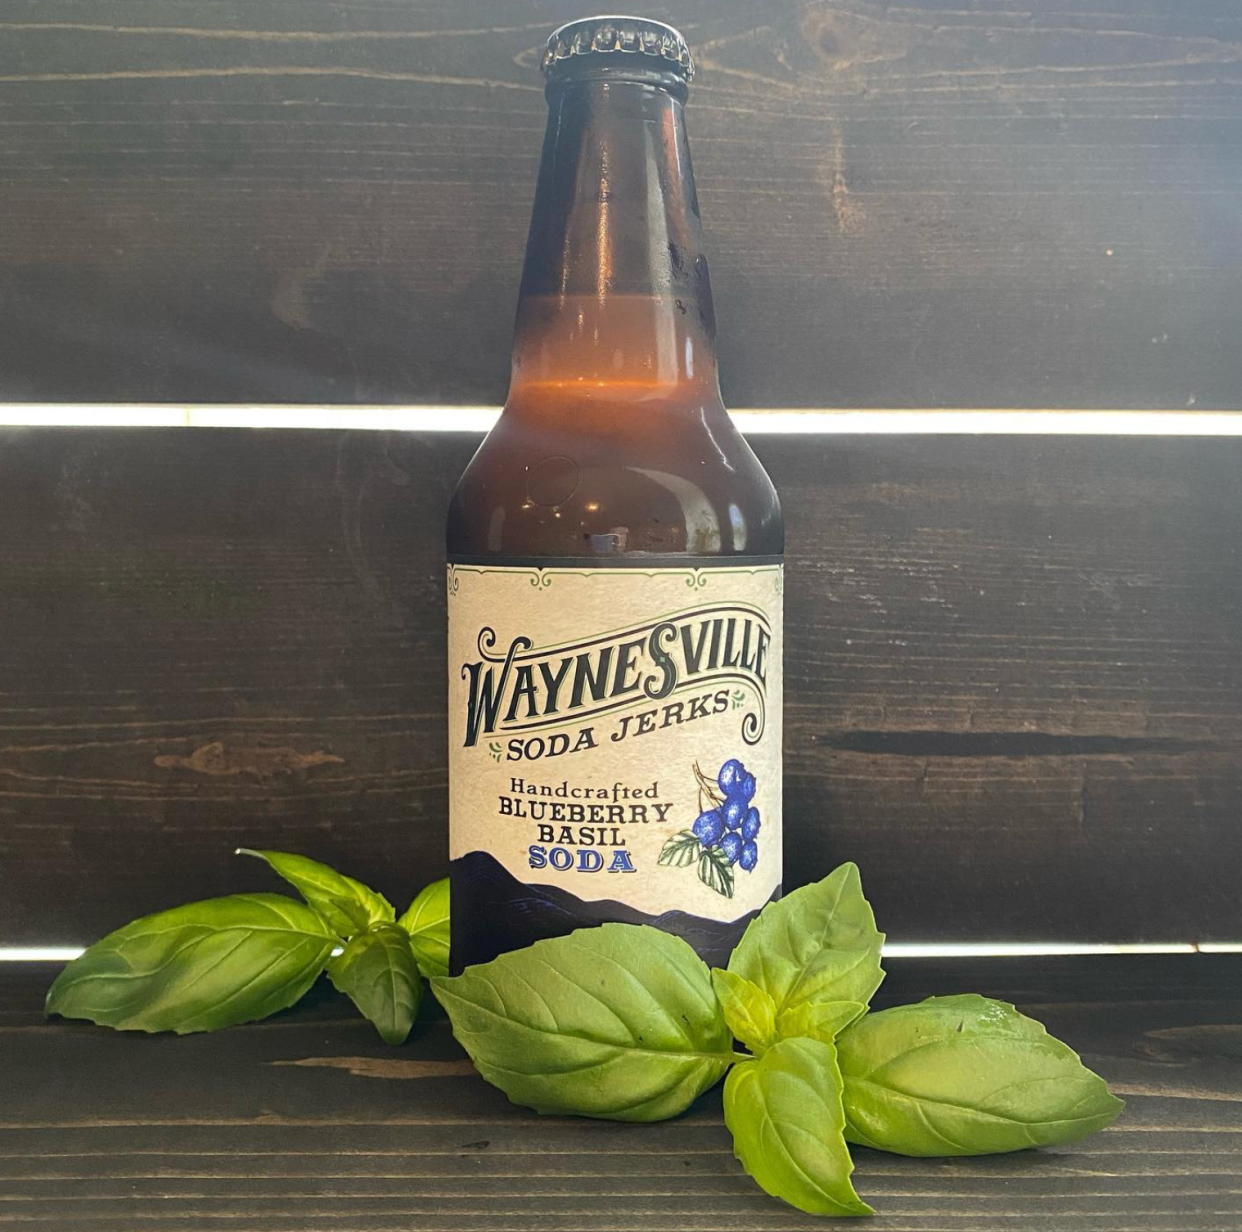 Waynesville Soda Jerks Blueberry Basil will be released as a private label edition using basil grown at the Biltmore Estate.